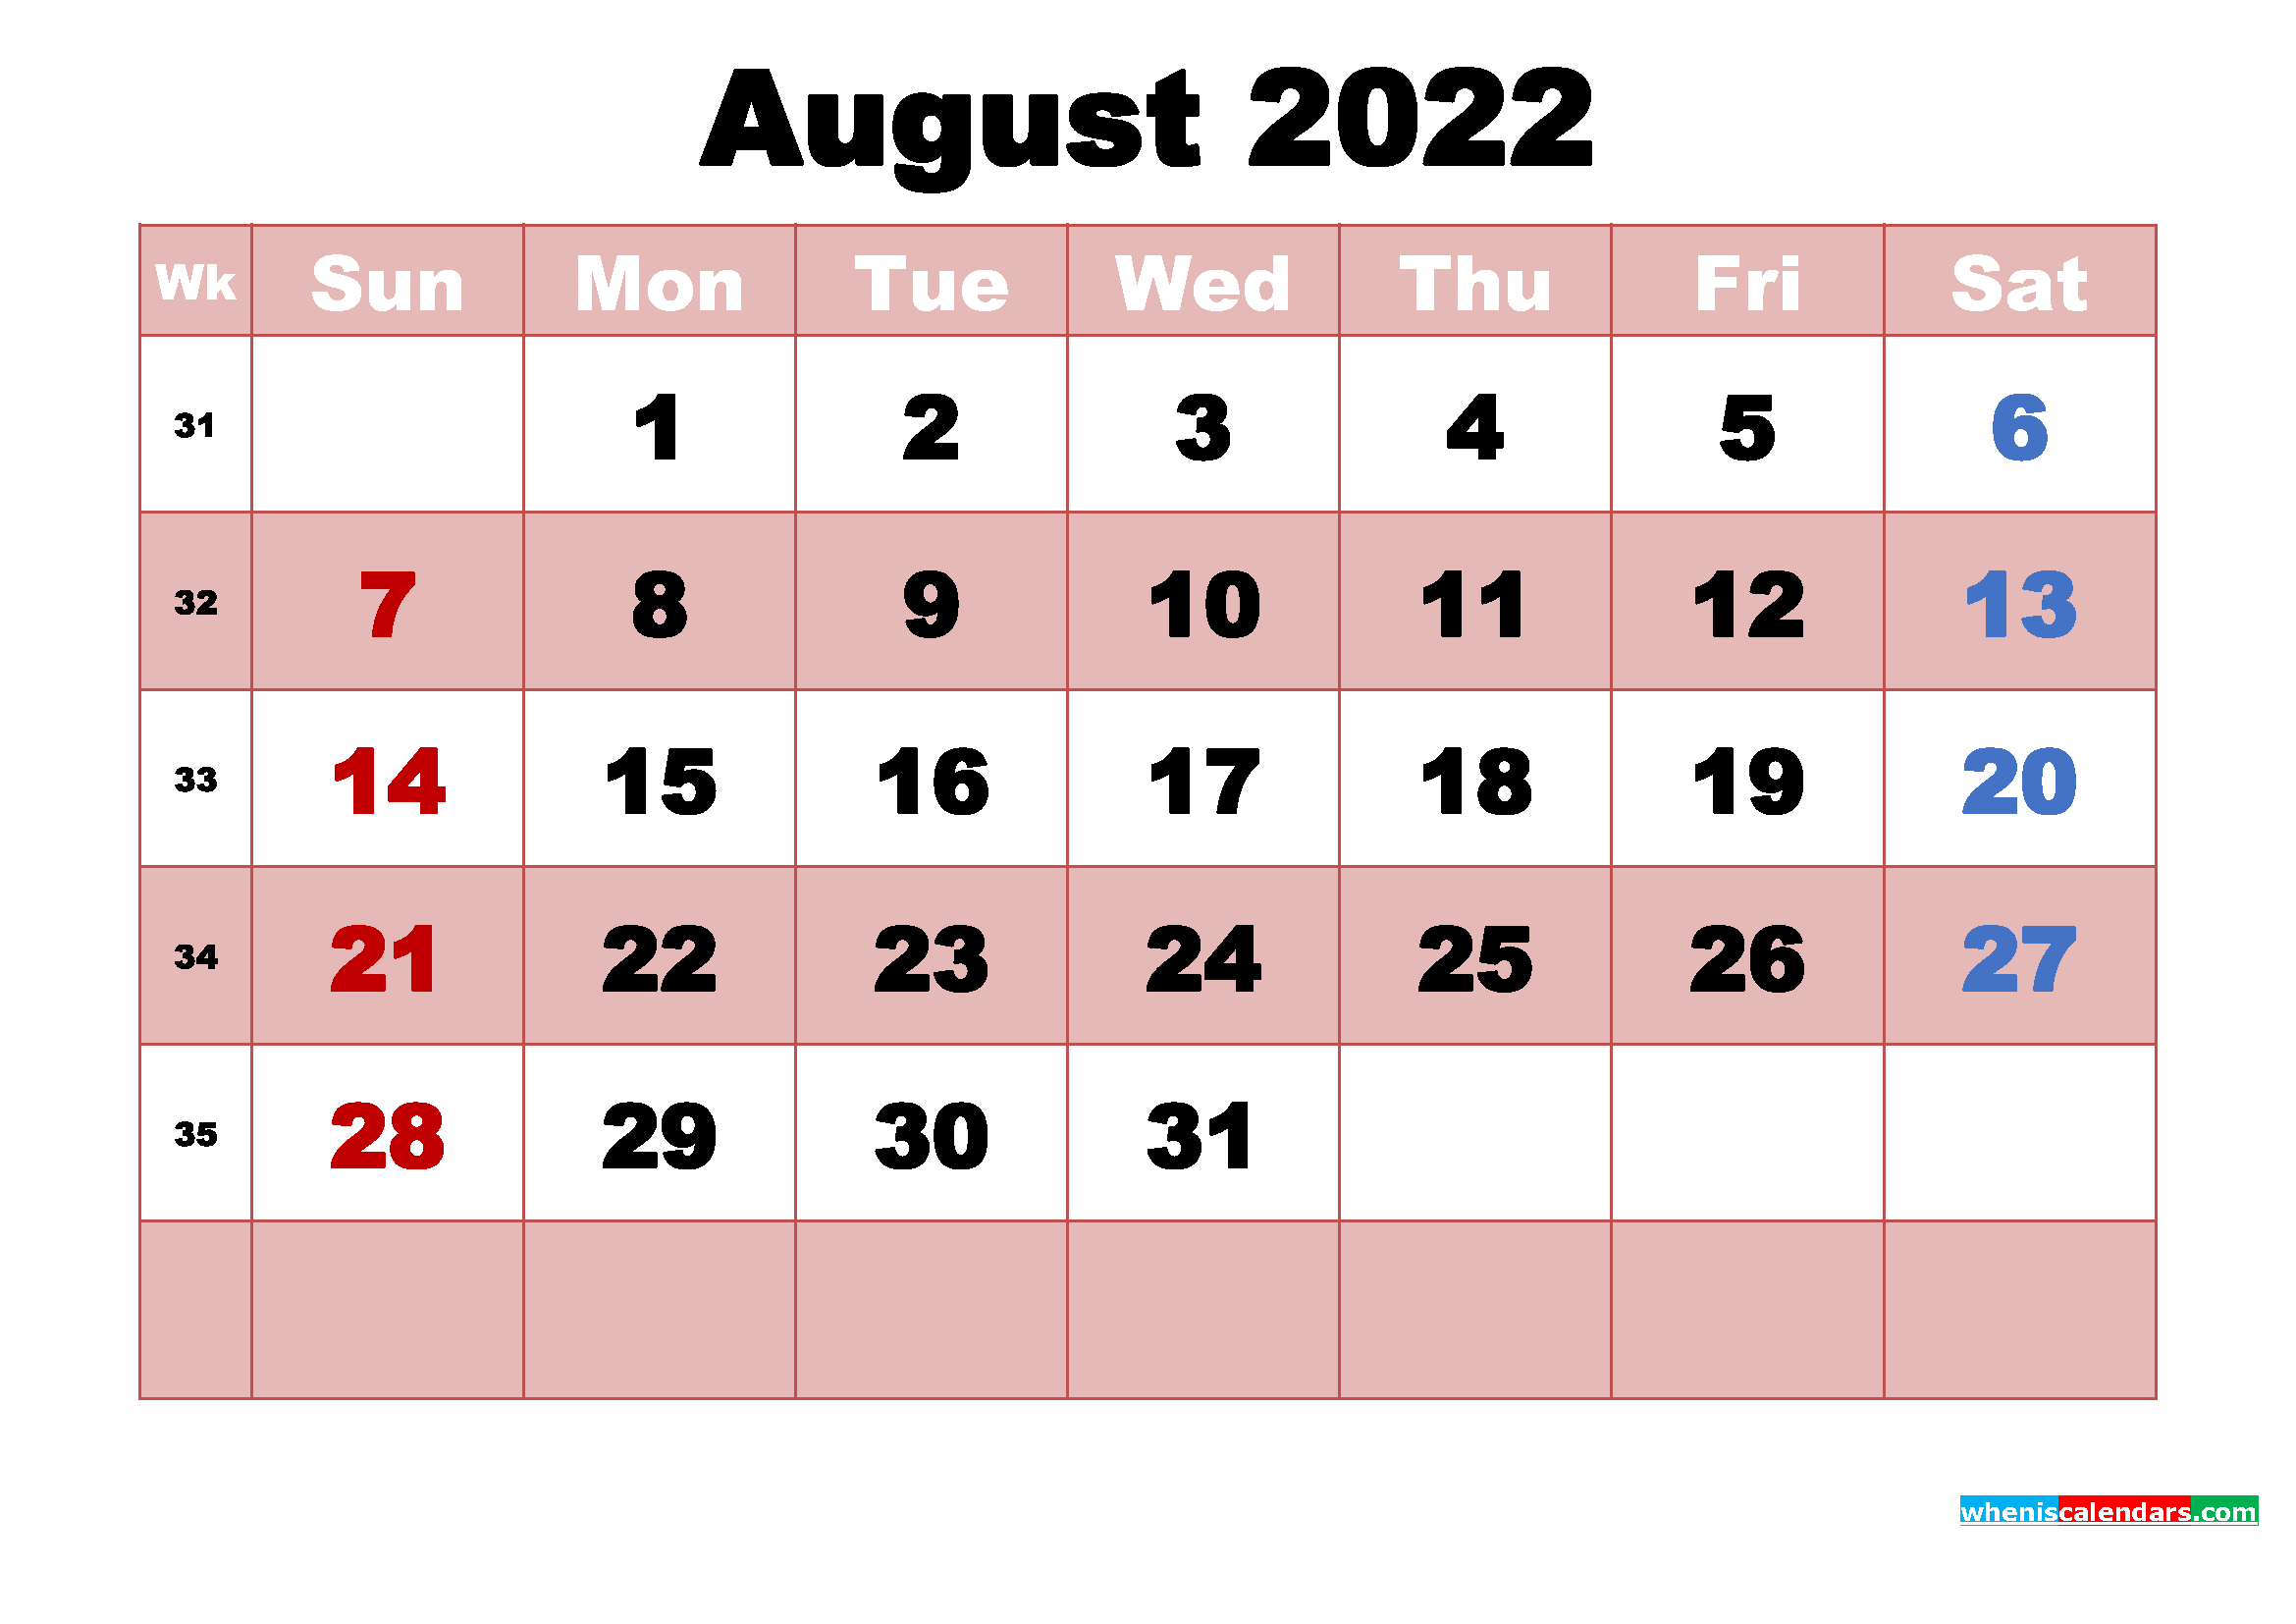 August 2022 Printable Monthly Calendar with Holidays